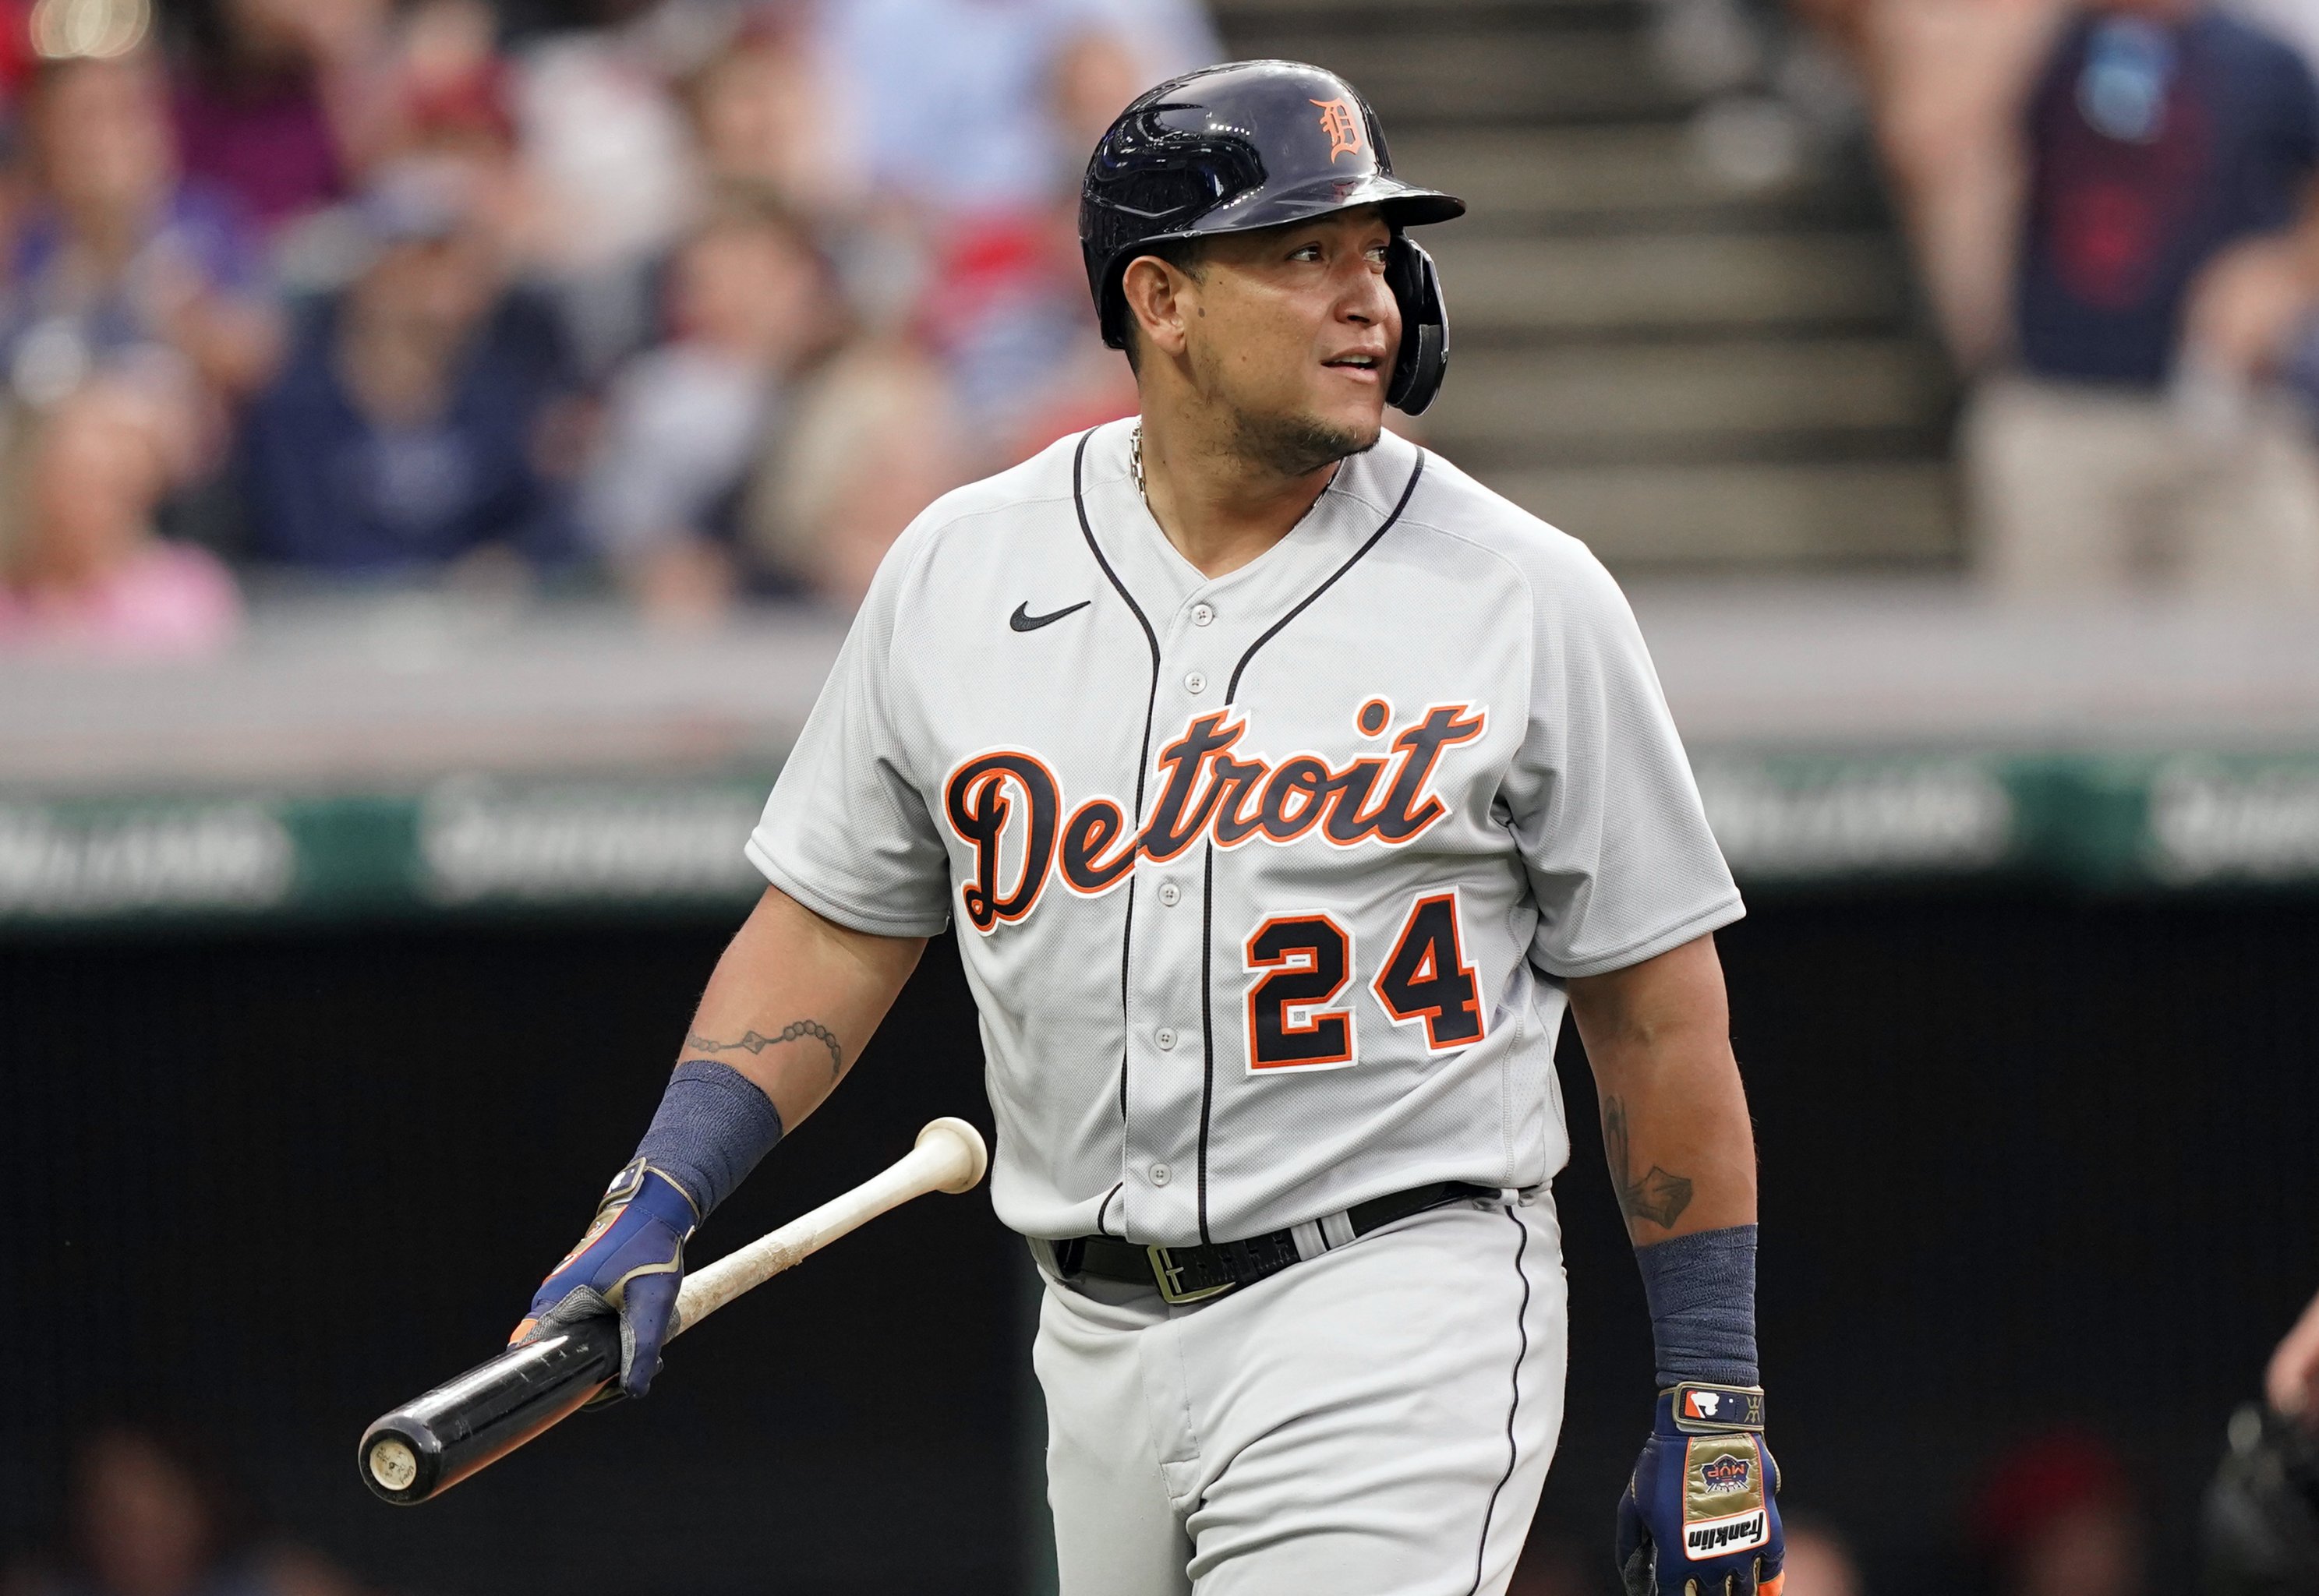 Rumor: Tigers' Miguel Cabrera stance for rest of 2023 season, revealed